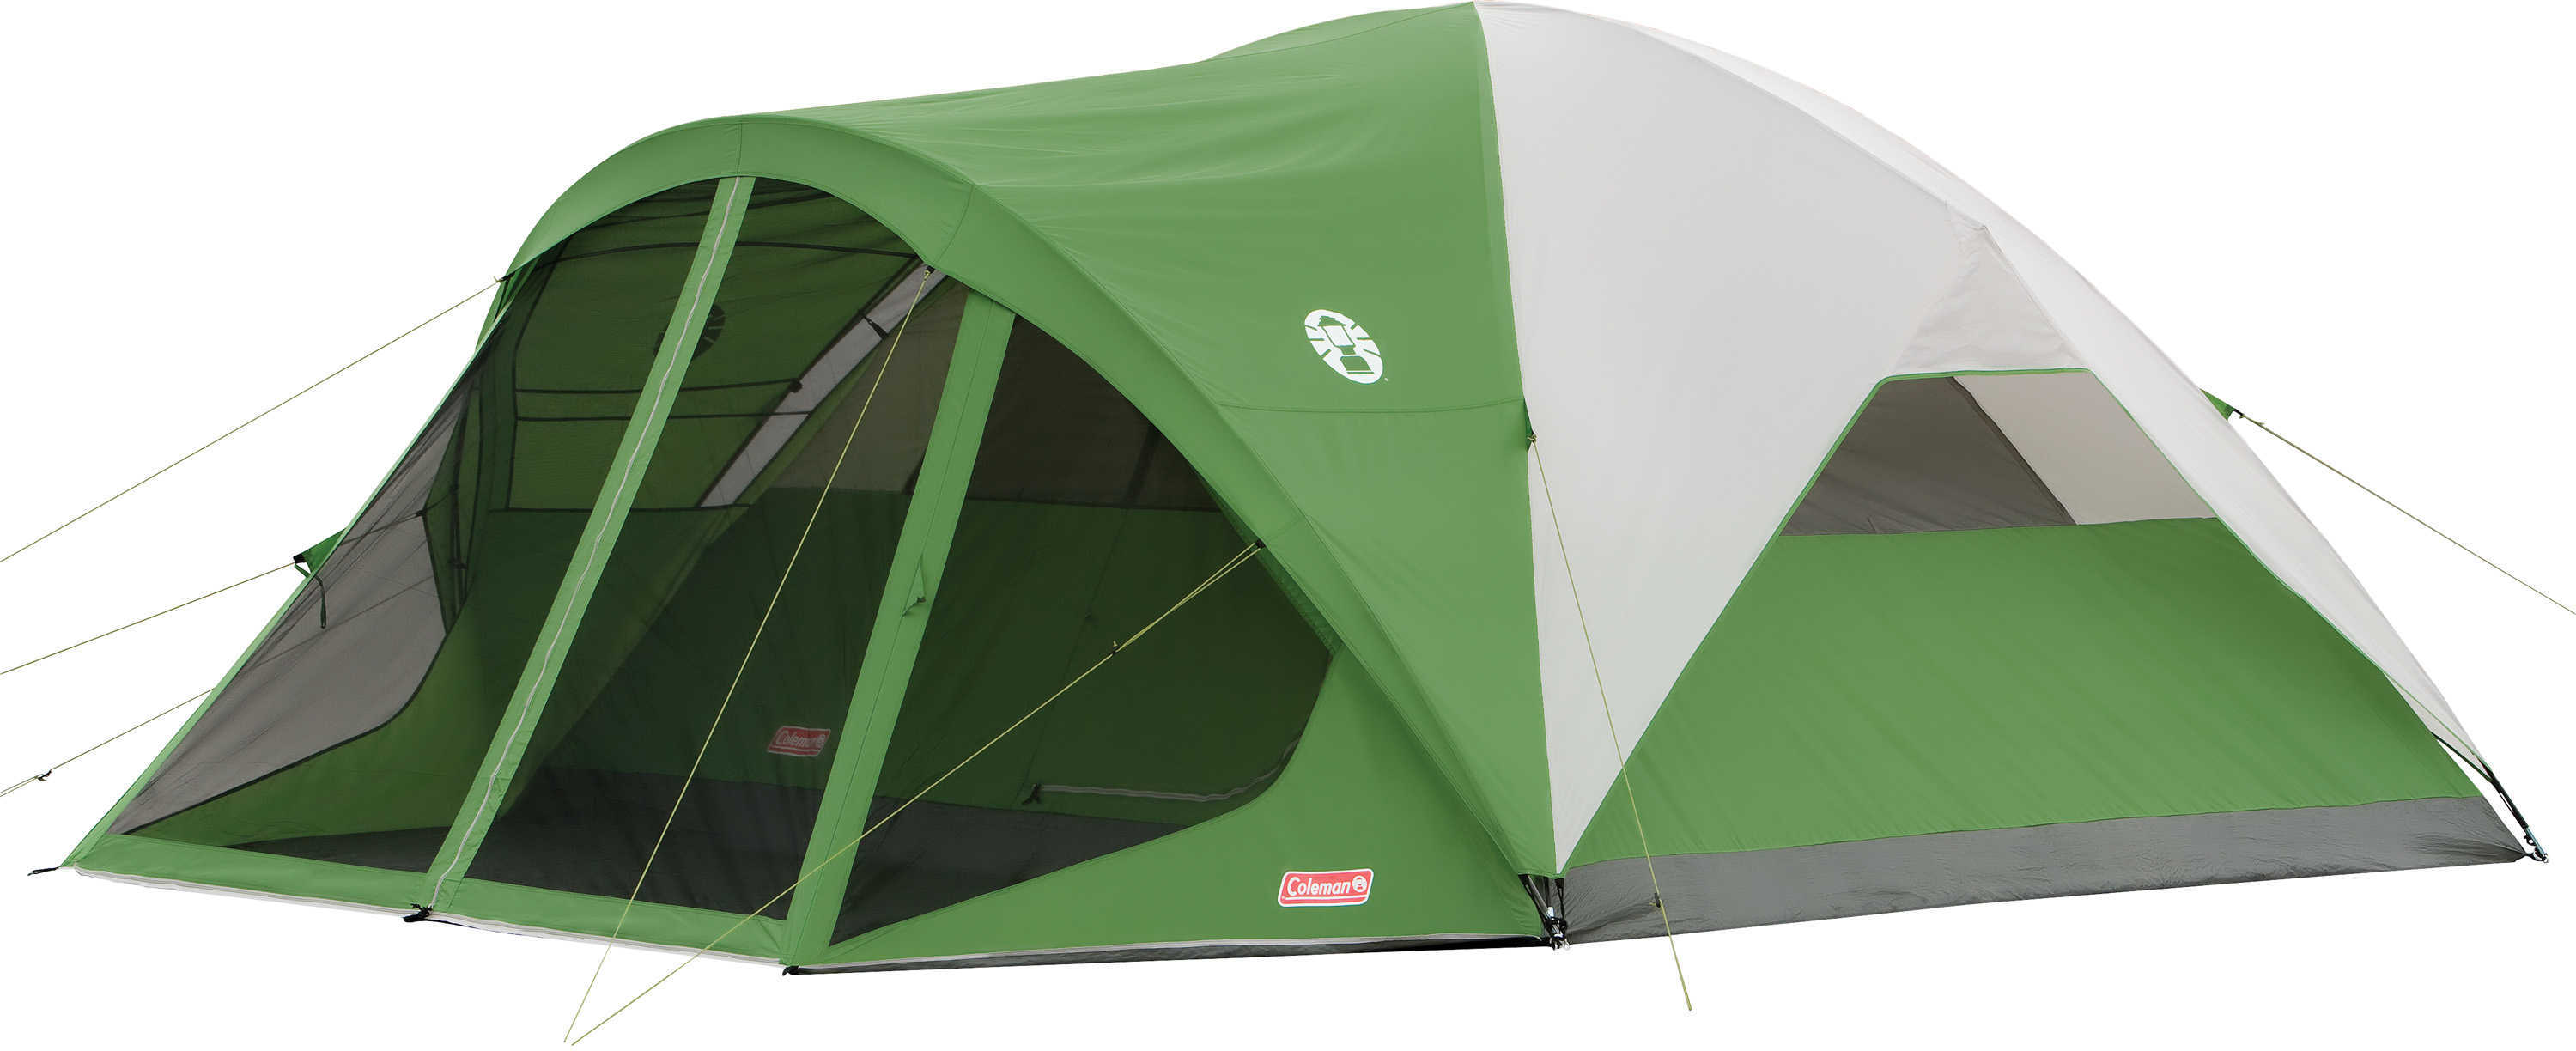 Coleman Evanston Tent 15' x 12', 8 Person, Screened Md: 2000007824